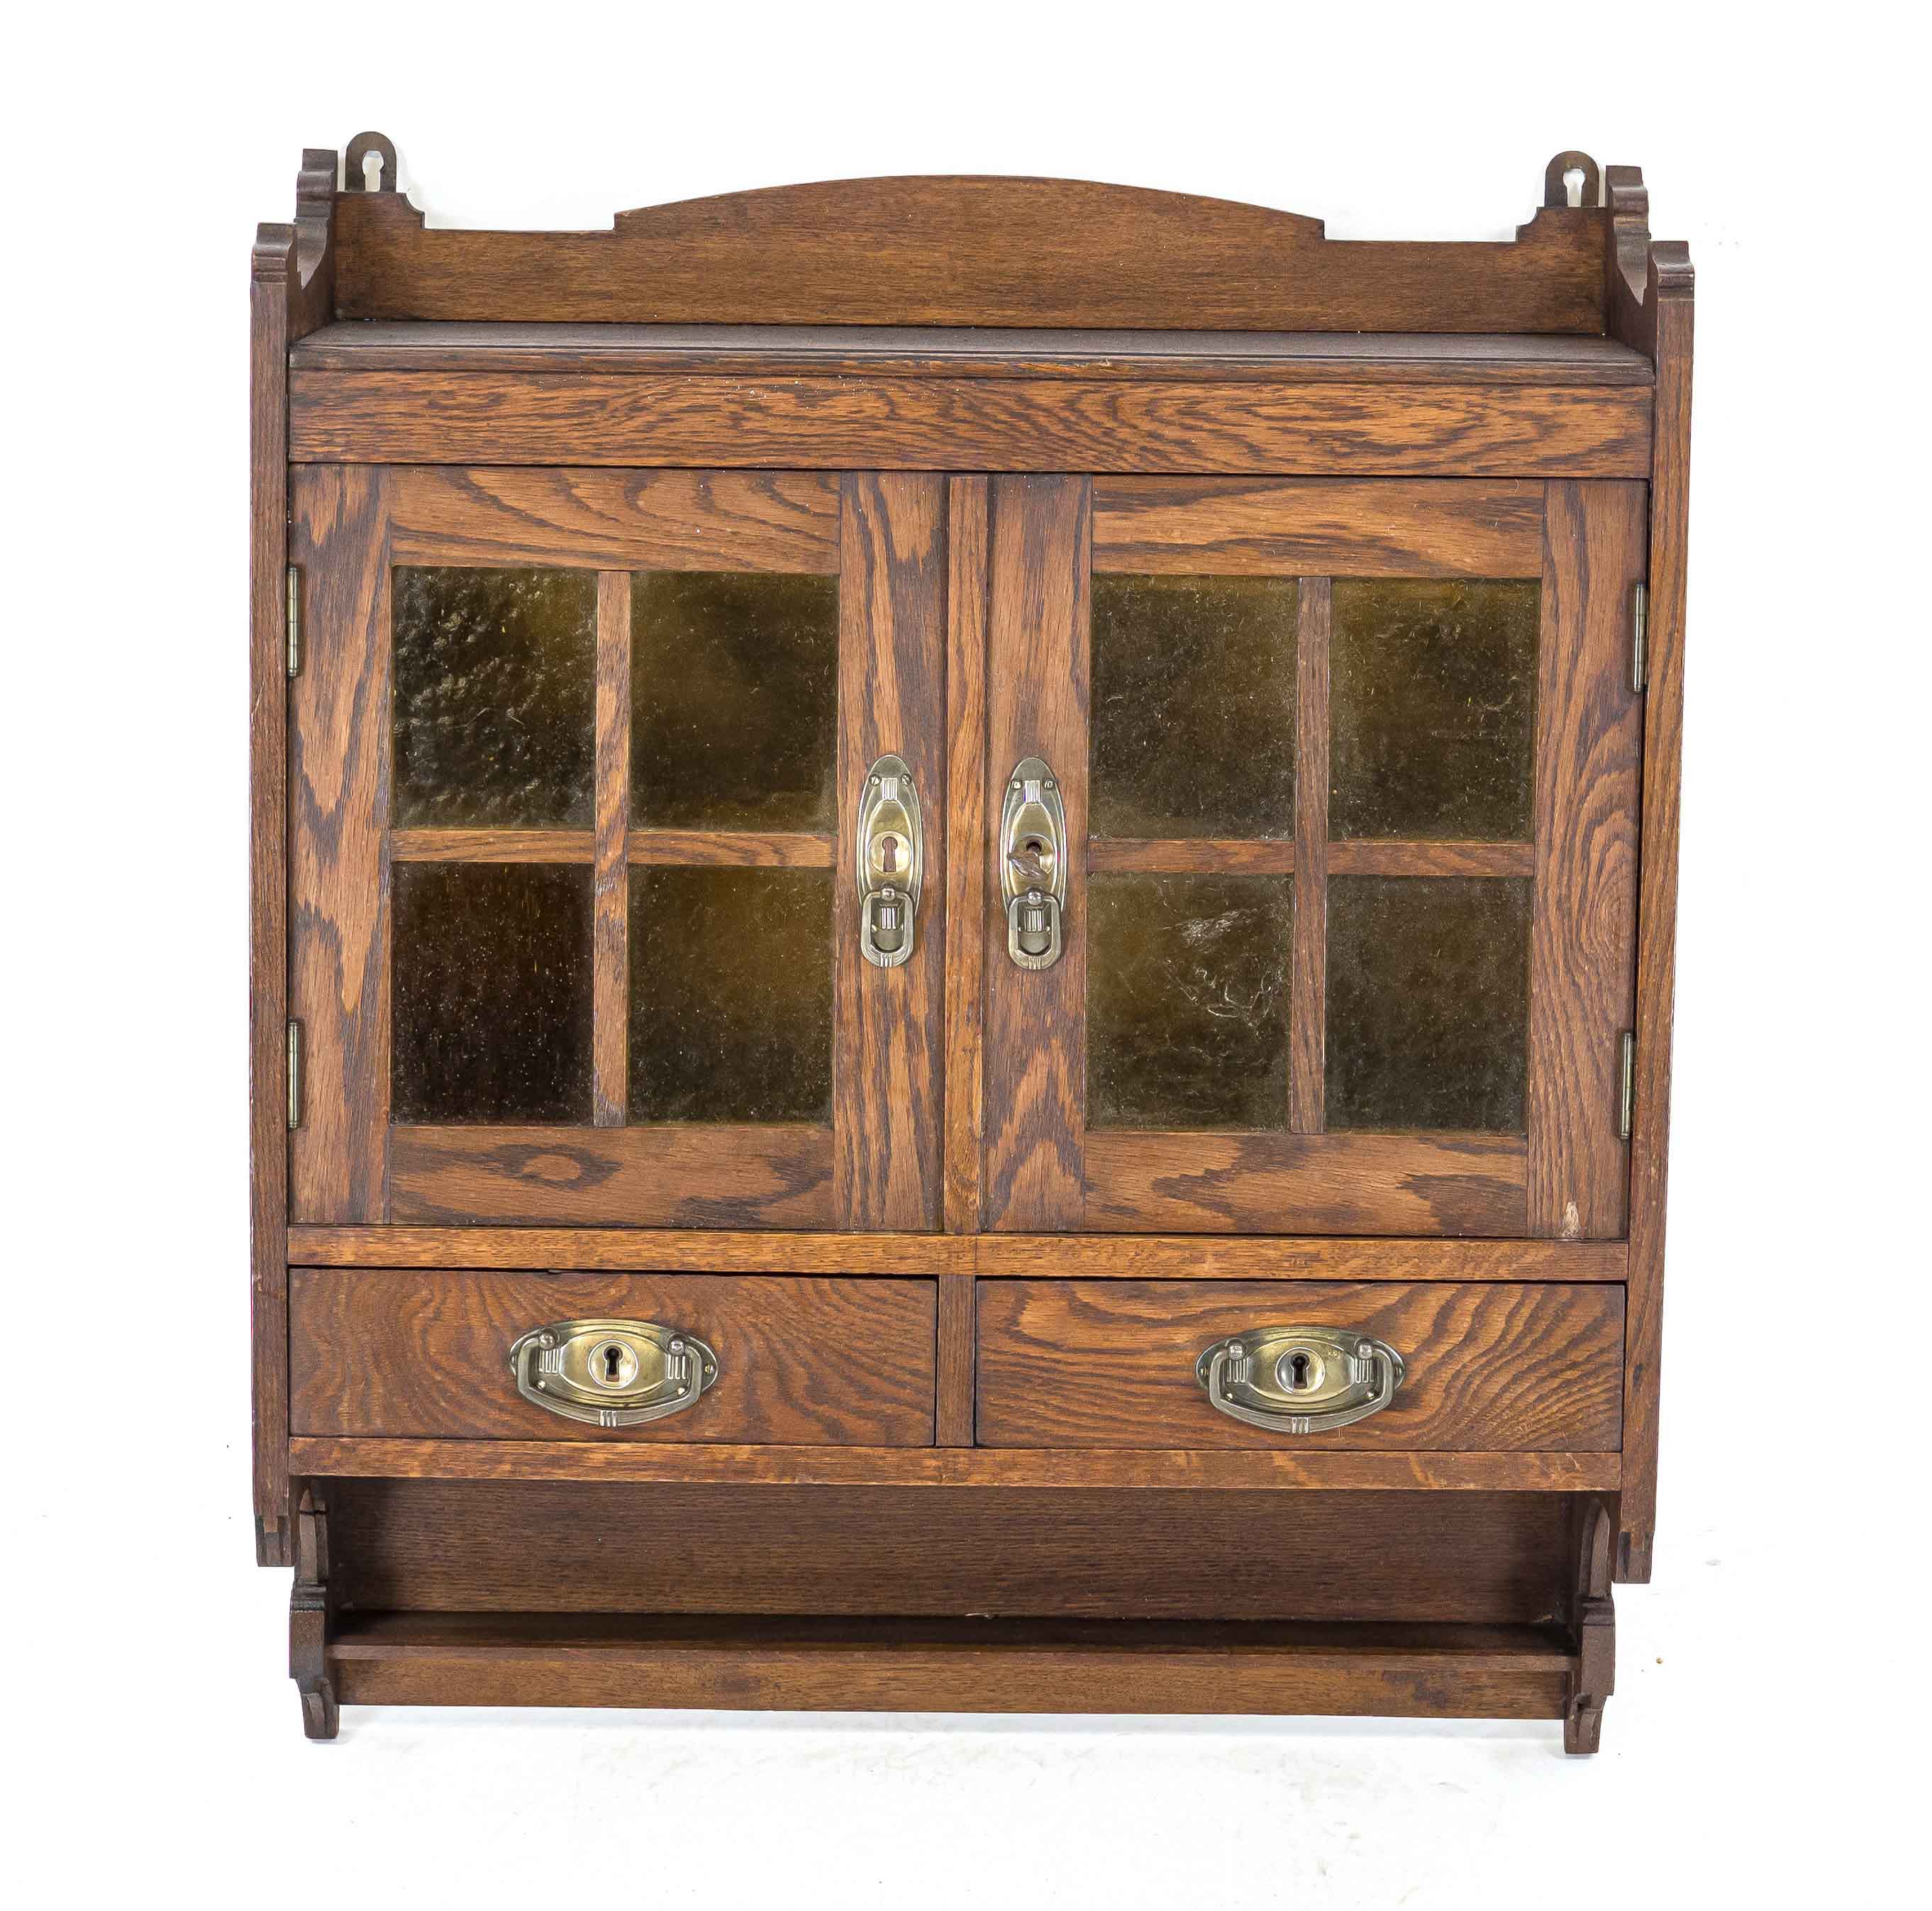 Hanging cupboard around 1910, oak, two doors with green glass and two drawers, 75 x 60 x 21 cm